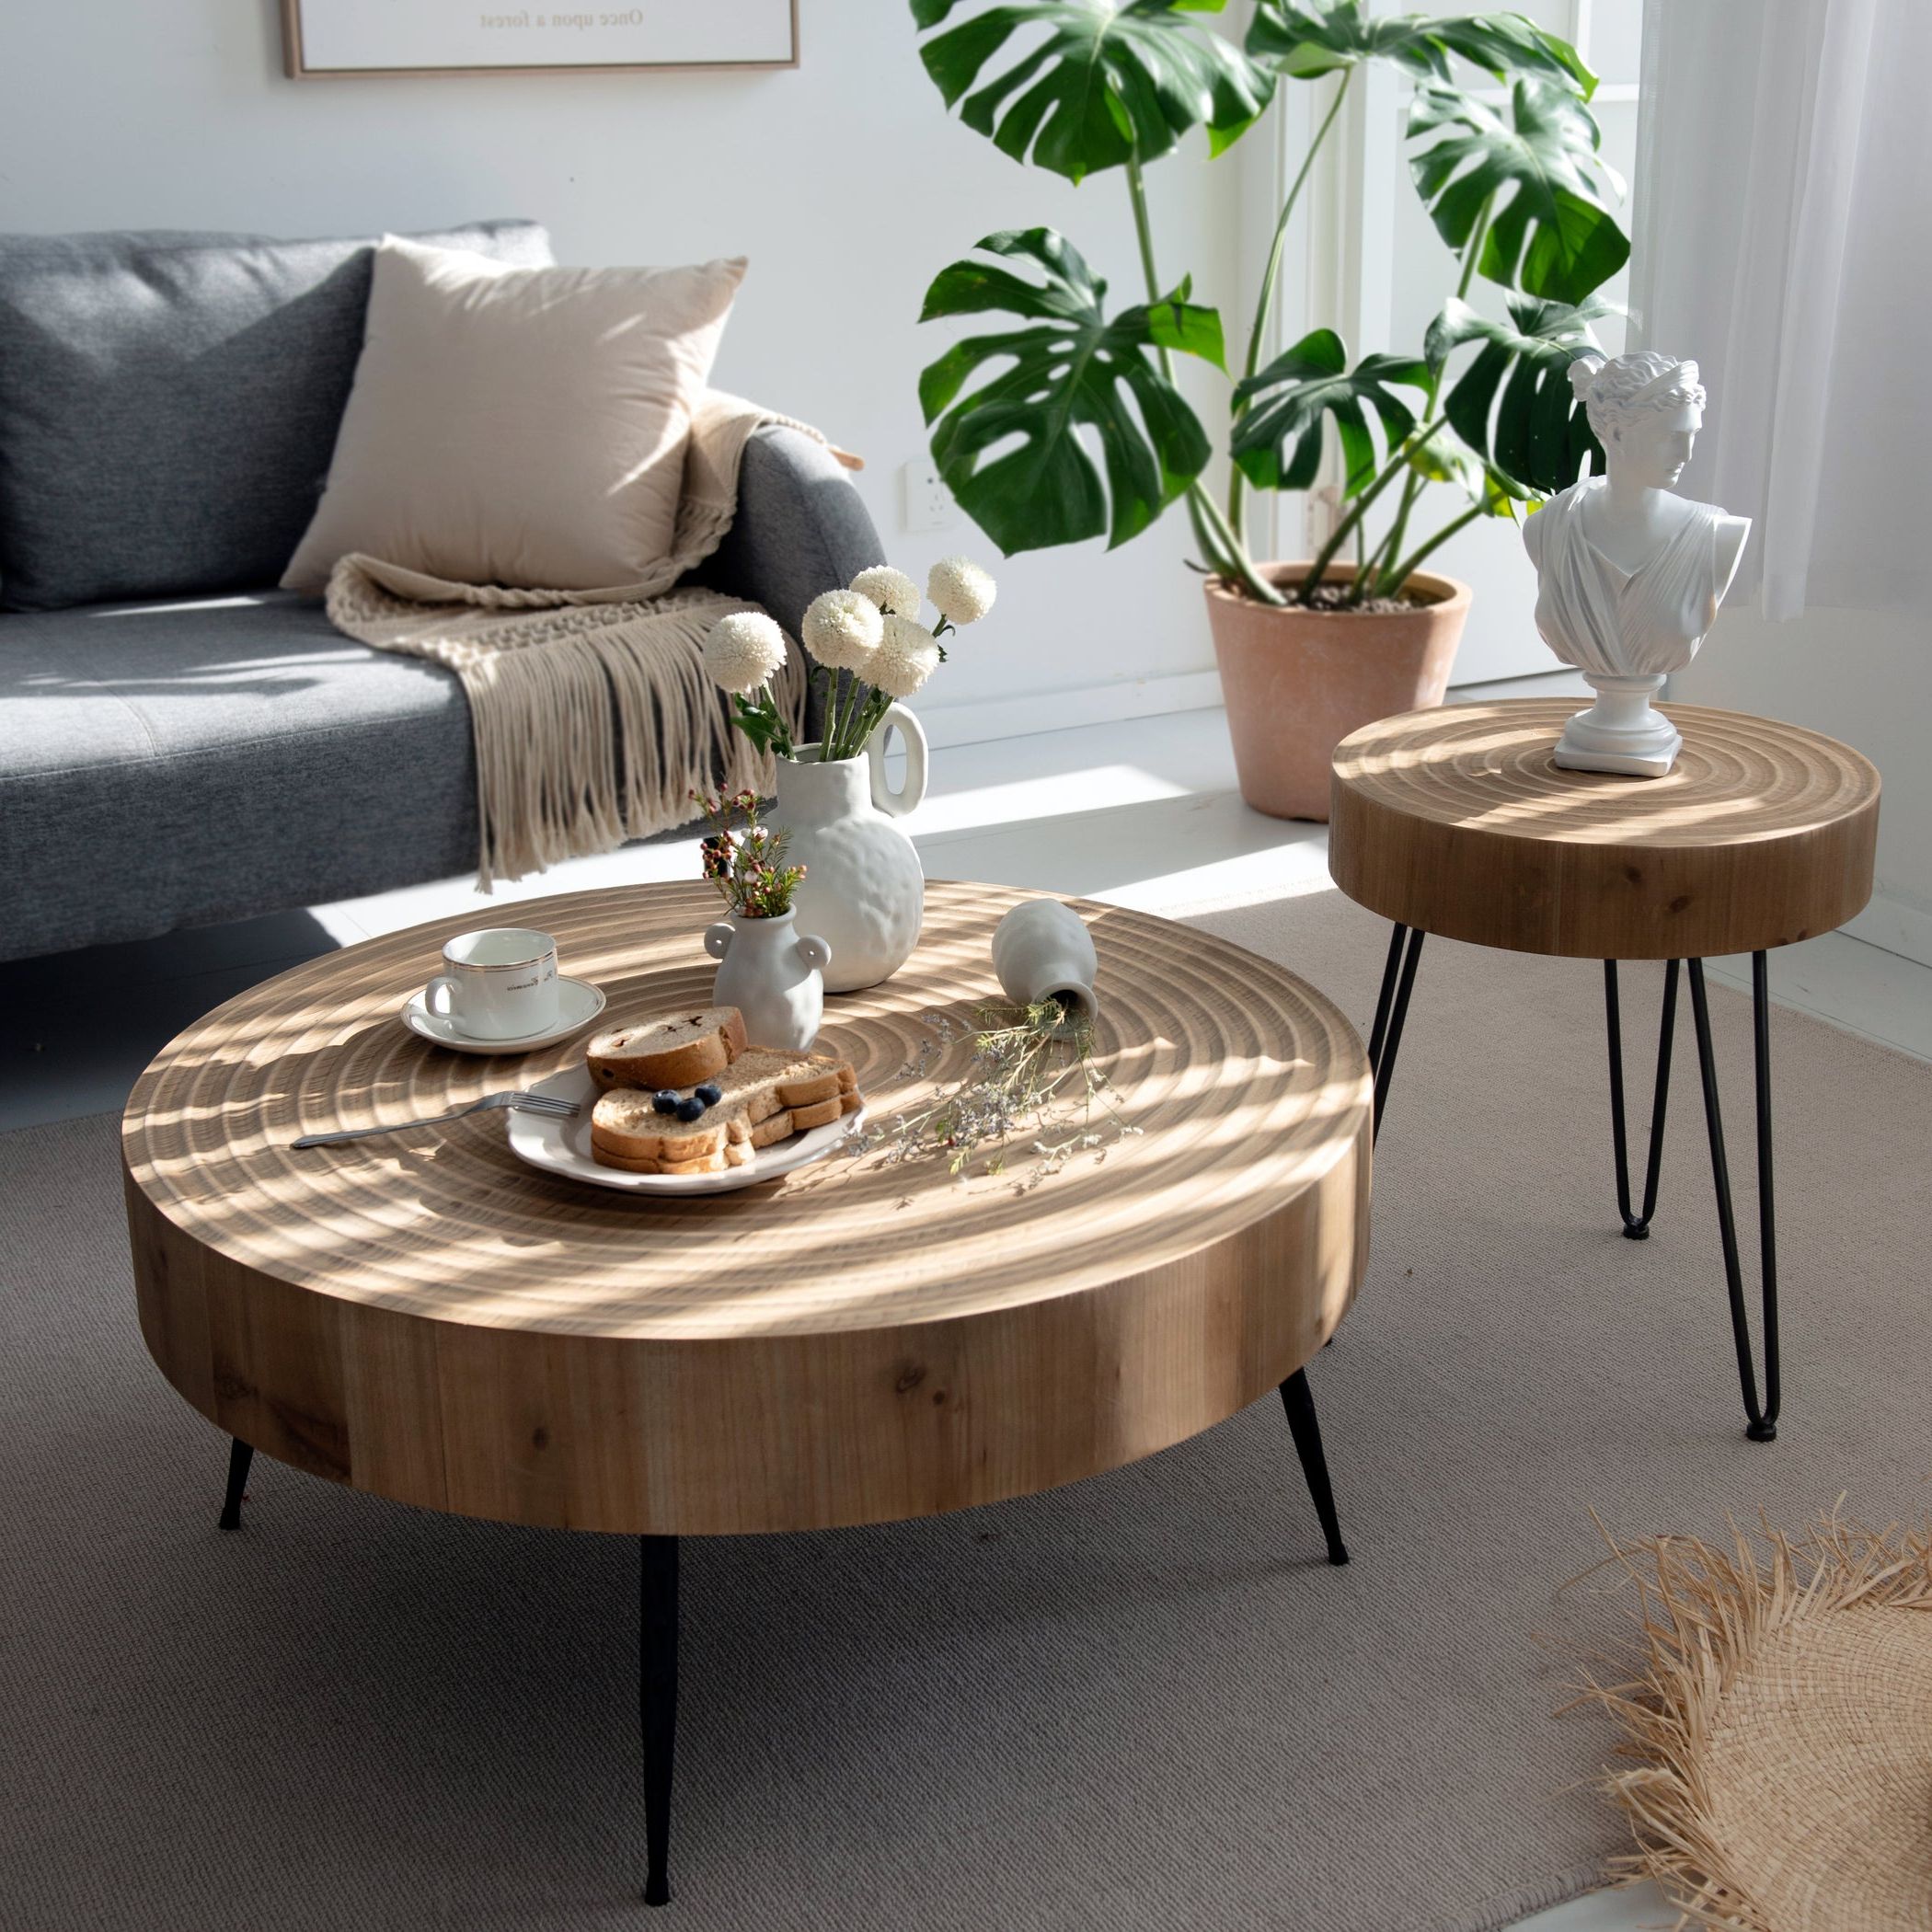 Cozayh 2 Piece Modern Farmhouse Living Room Coffee Table Set, Round Intended For Living Room Farmhouse Coffee Tables (Gallery 10 of 20)